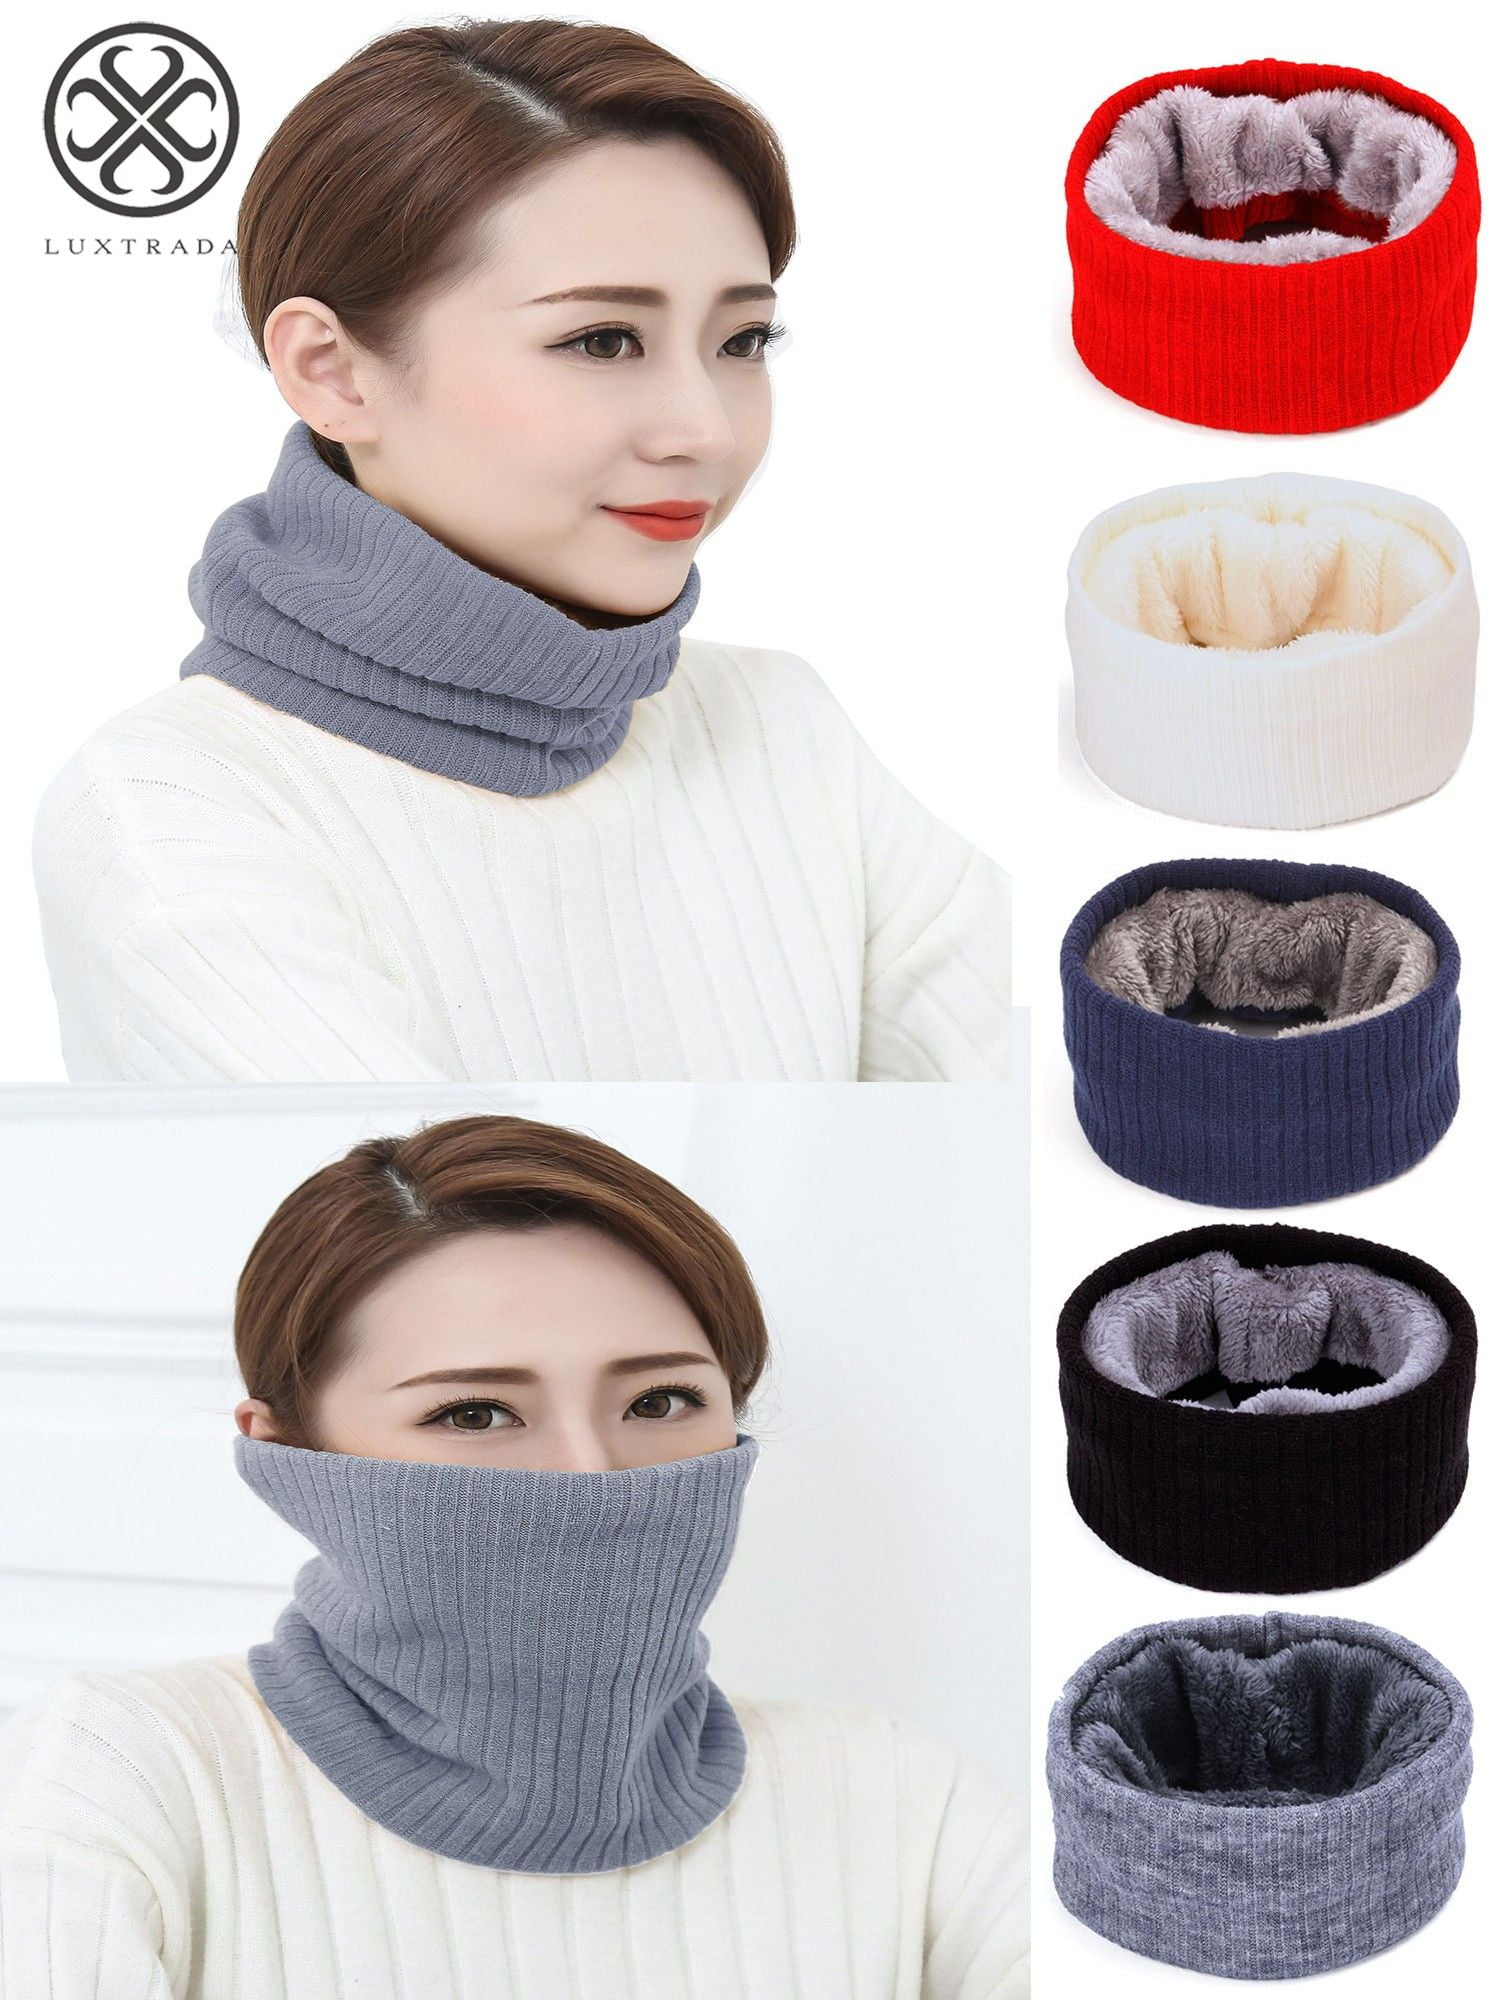 VBIGER Unisex Knitted Scarf Thick Winter Circle Scarf Thermal Neck Warmer for Outdoor Sports 